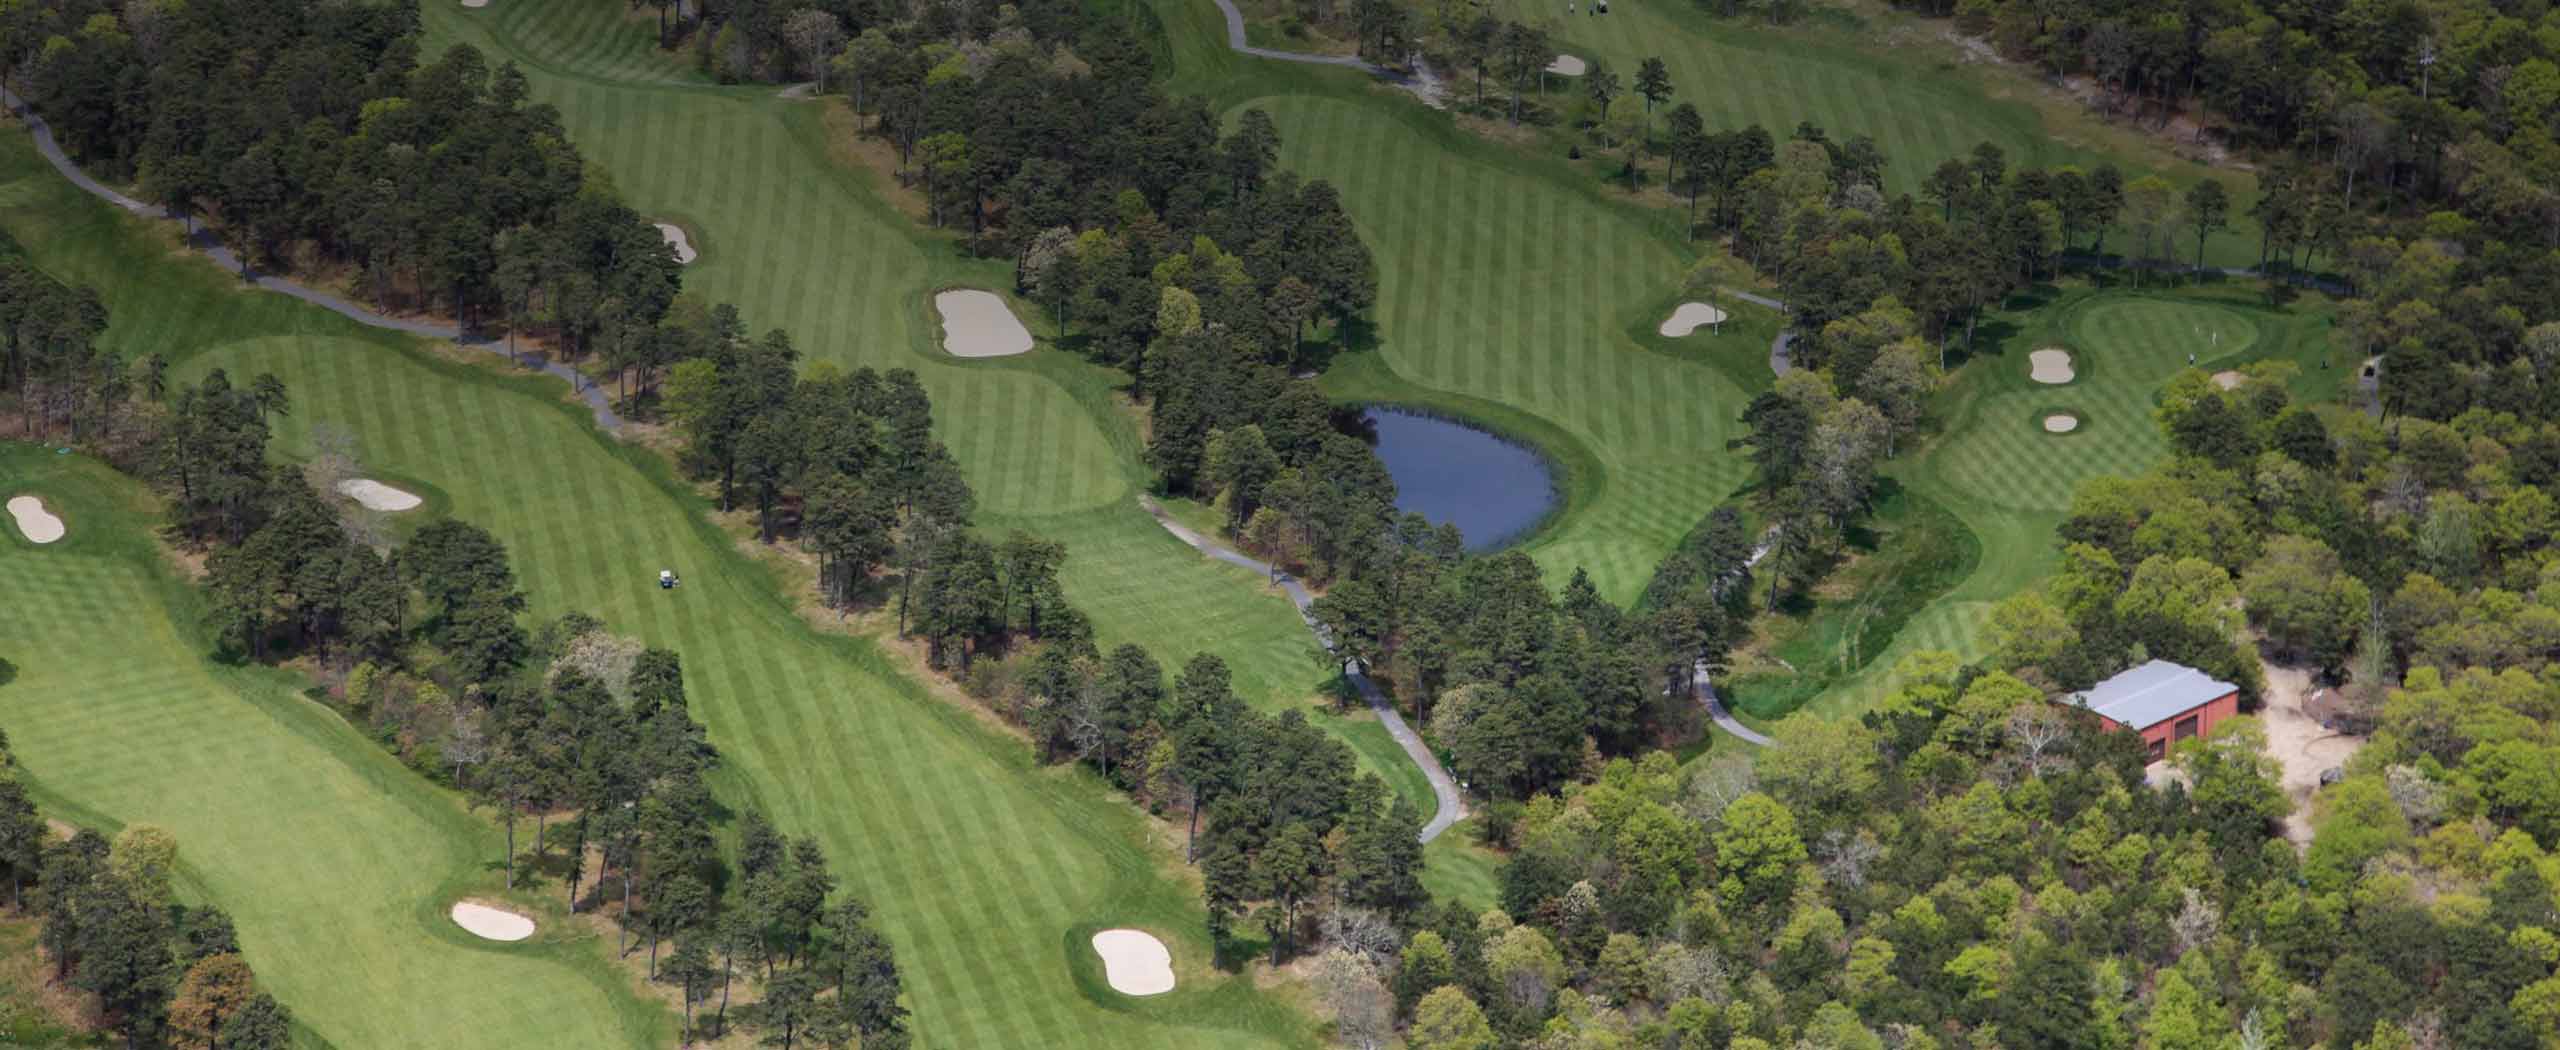 Overhead view of the Captains Golf Course on Cape Cod